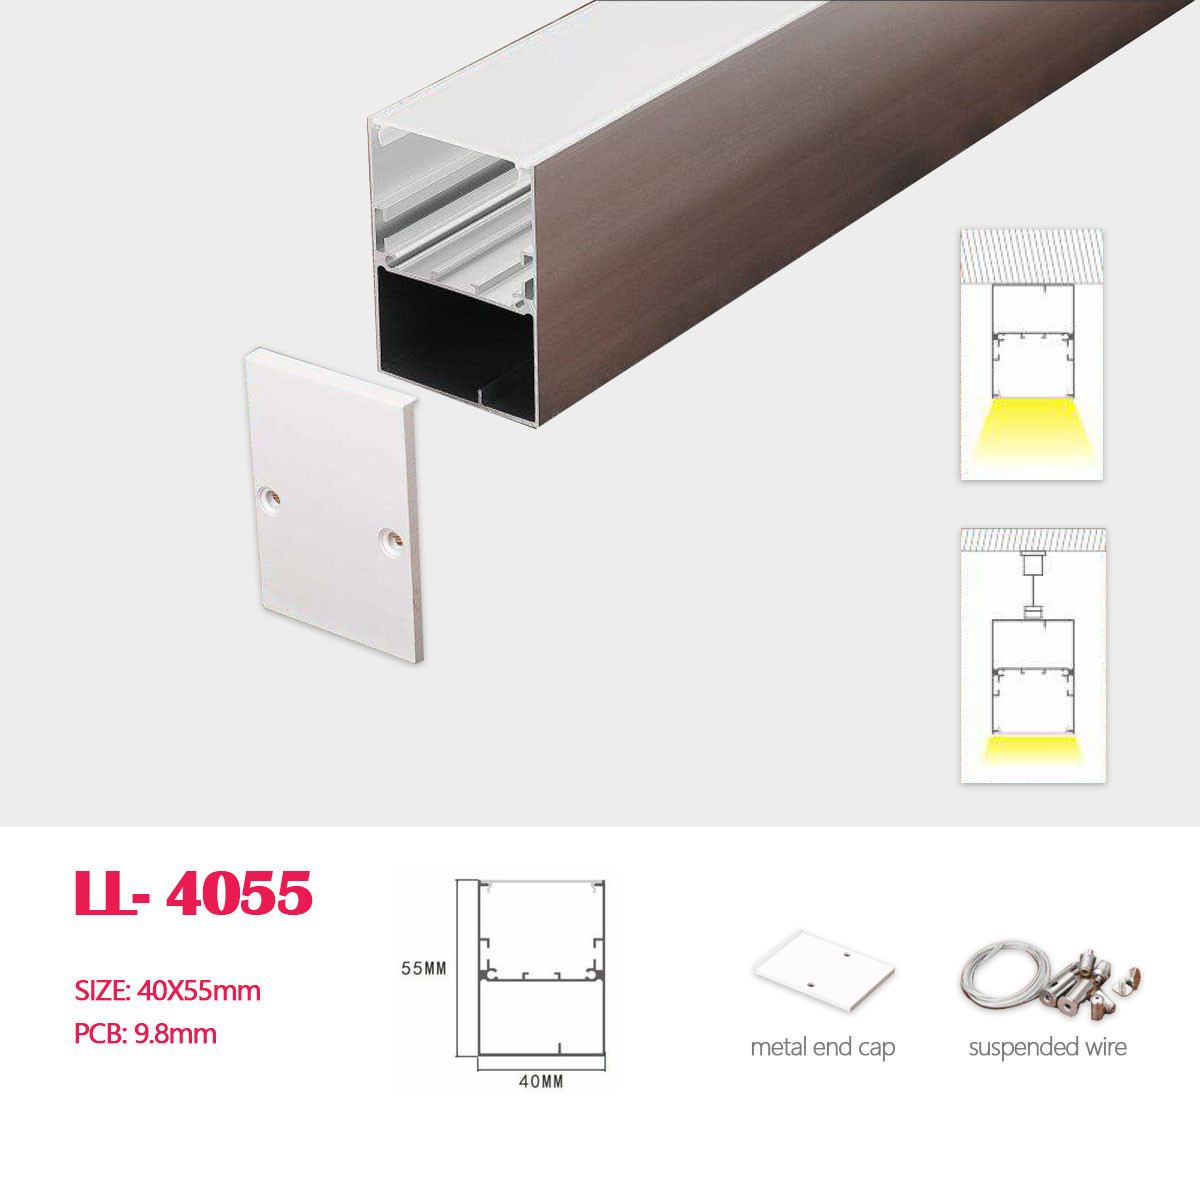 1.18M (3.87FT) 40MM*55MM Hanging or Surface Mounted Aluminum Profile with Flat  Cover, Matel end cap and Suspended wire  for LED Strip Lighting Application